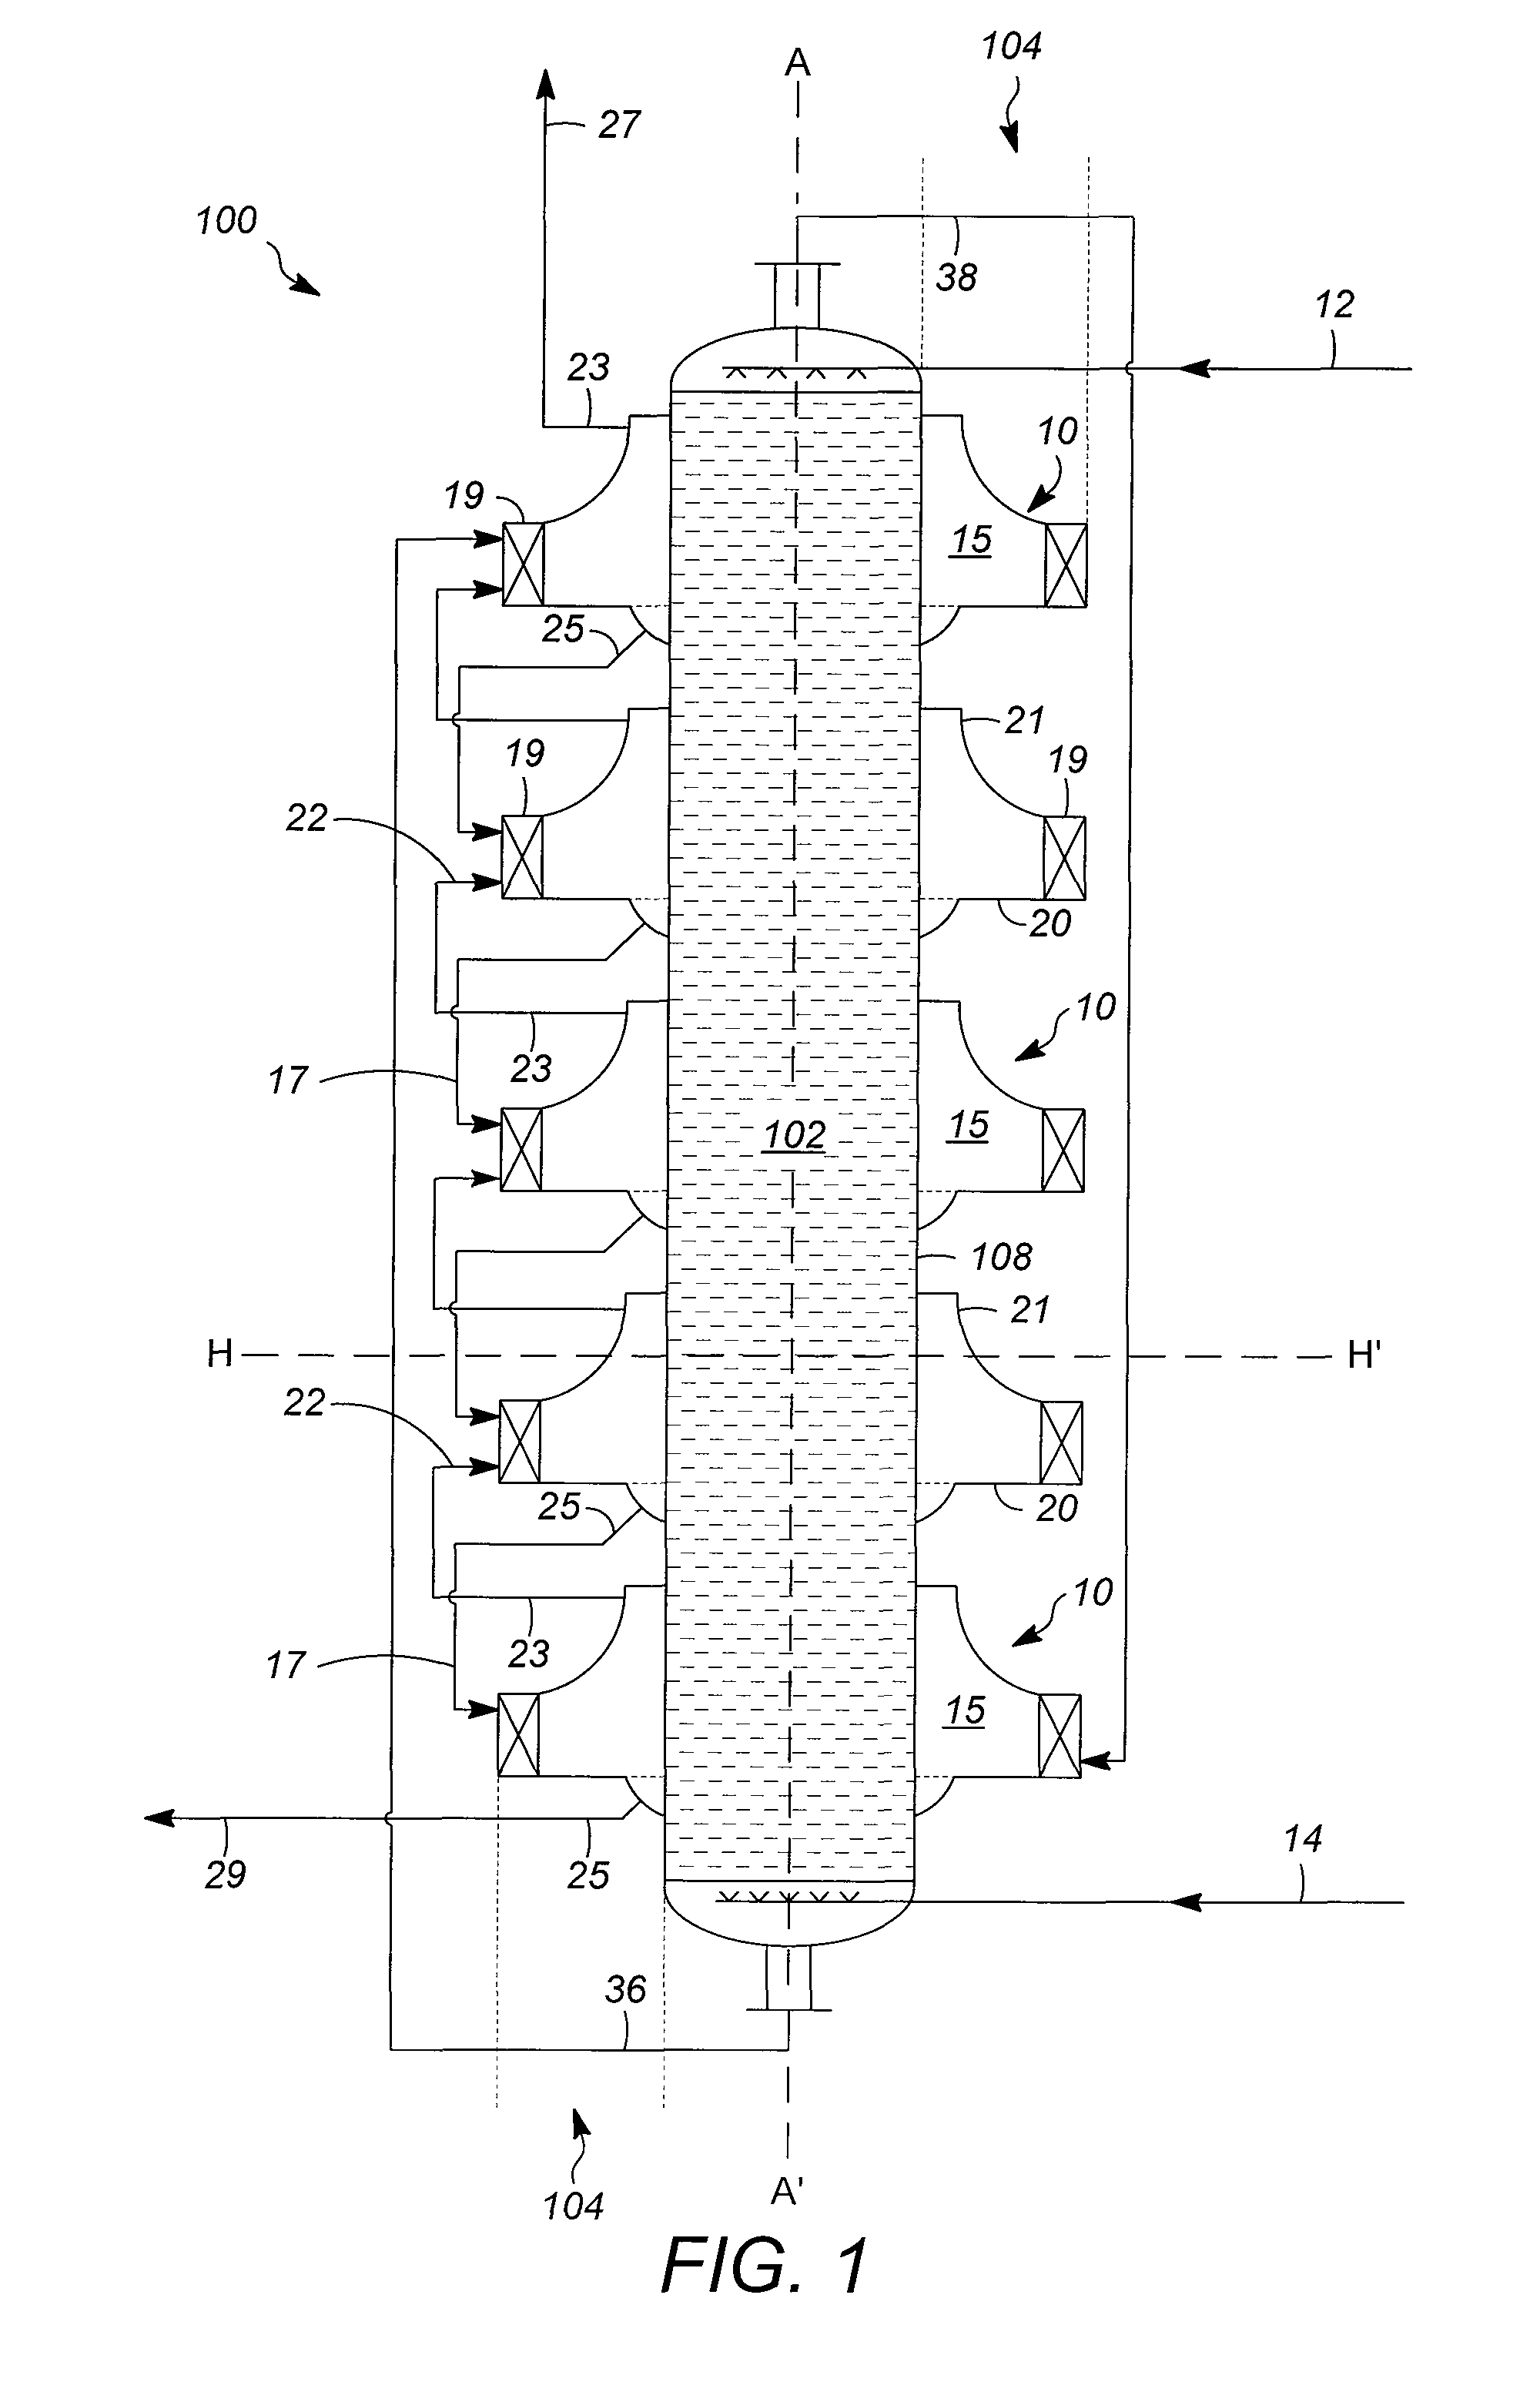 Vapor-liquid contacting apparatuses having a secondary absorption zone with vortex contacting stages